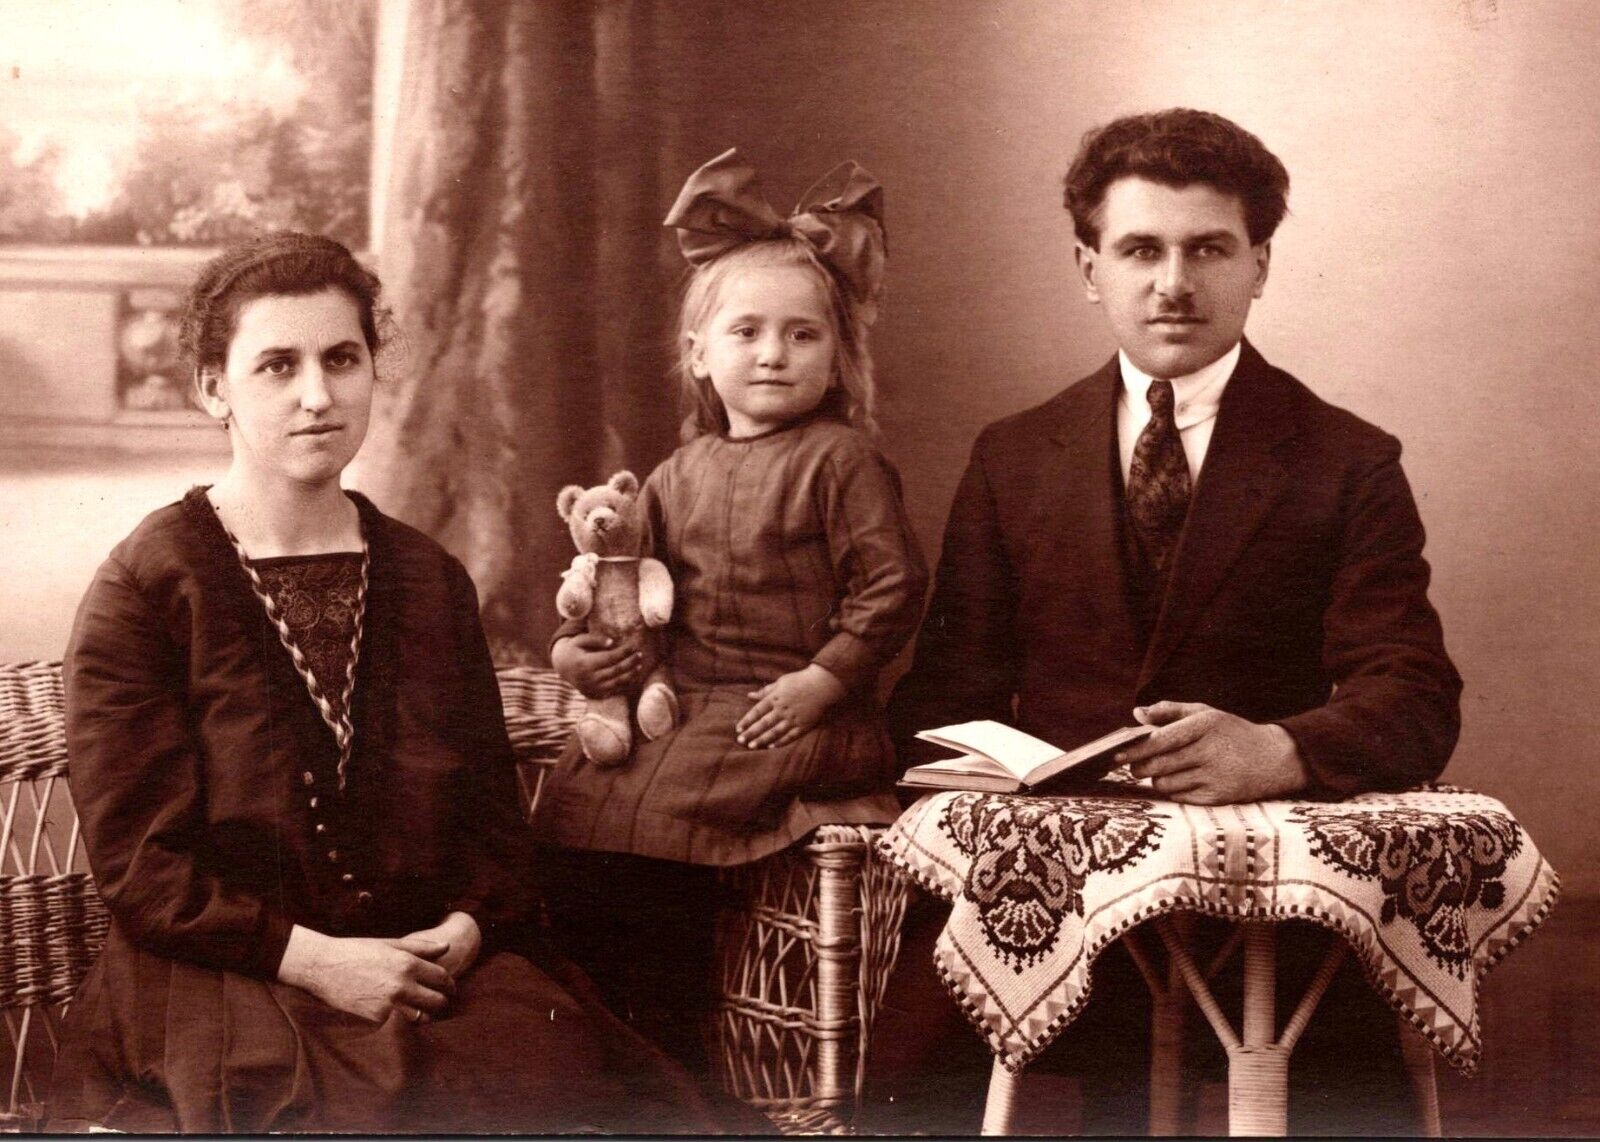 WELL DRESSED YOUNG COUPLE AND THEIR ADORABLE CHILD : TEDDY BEAR : RPPC